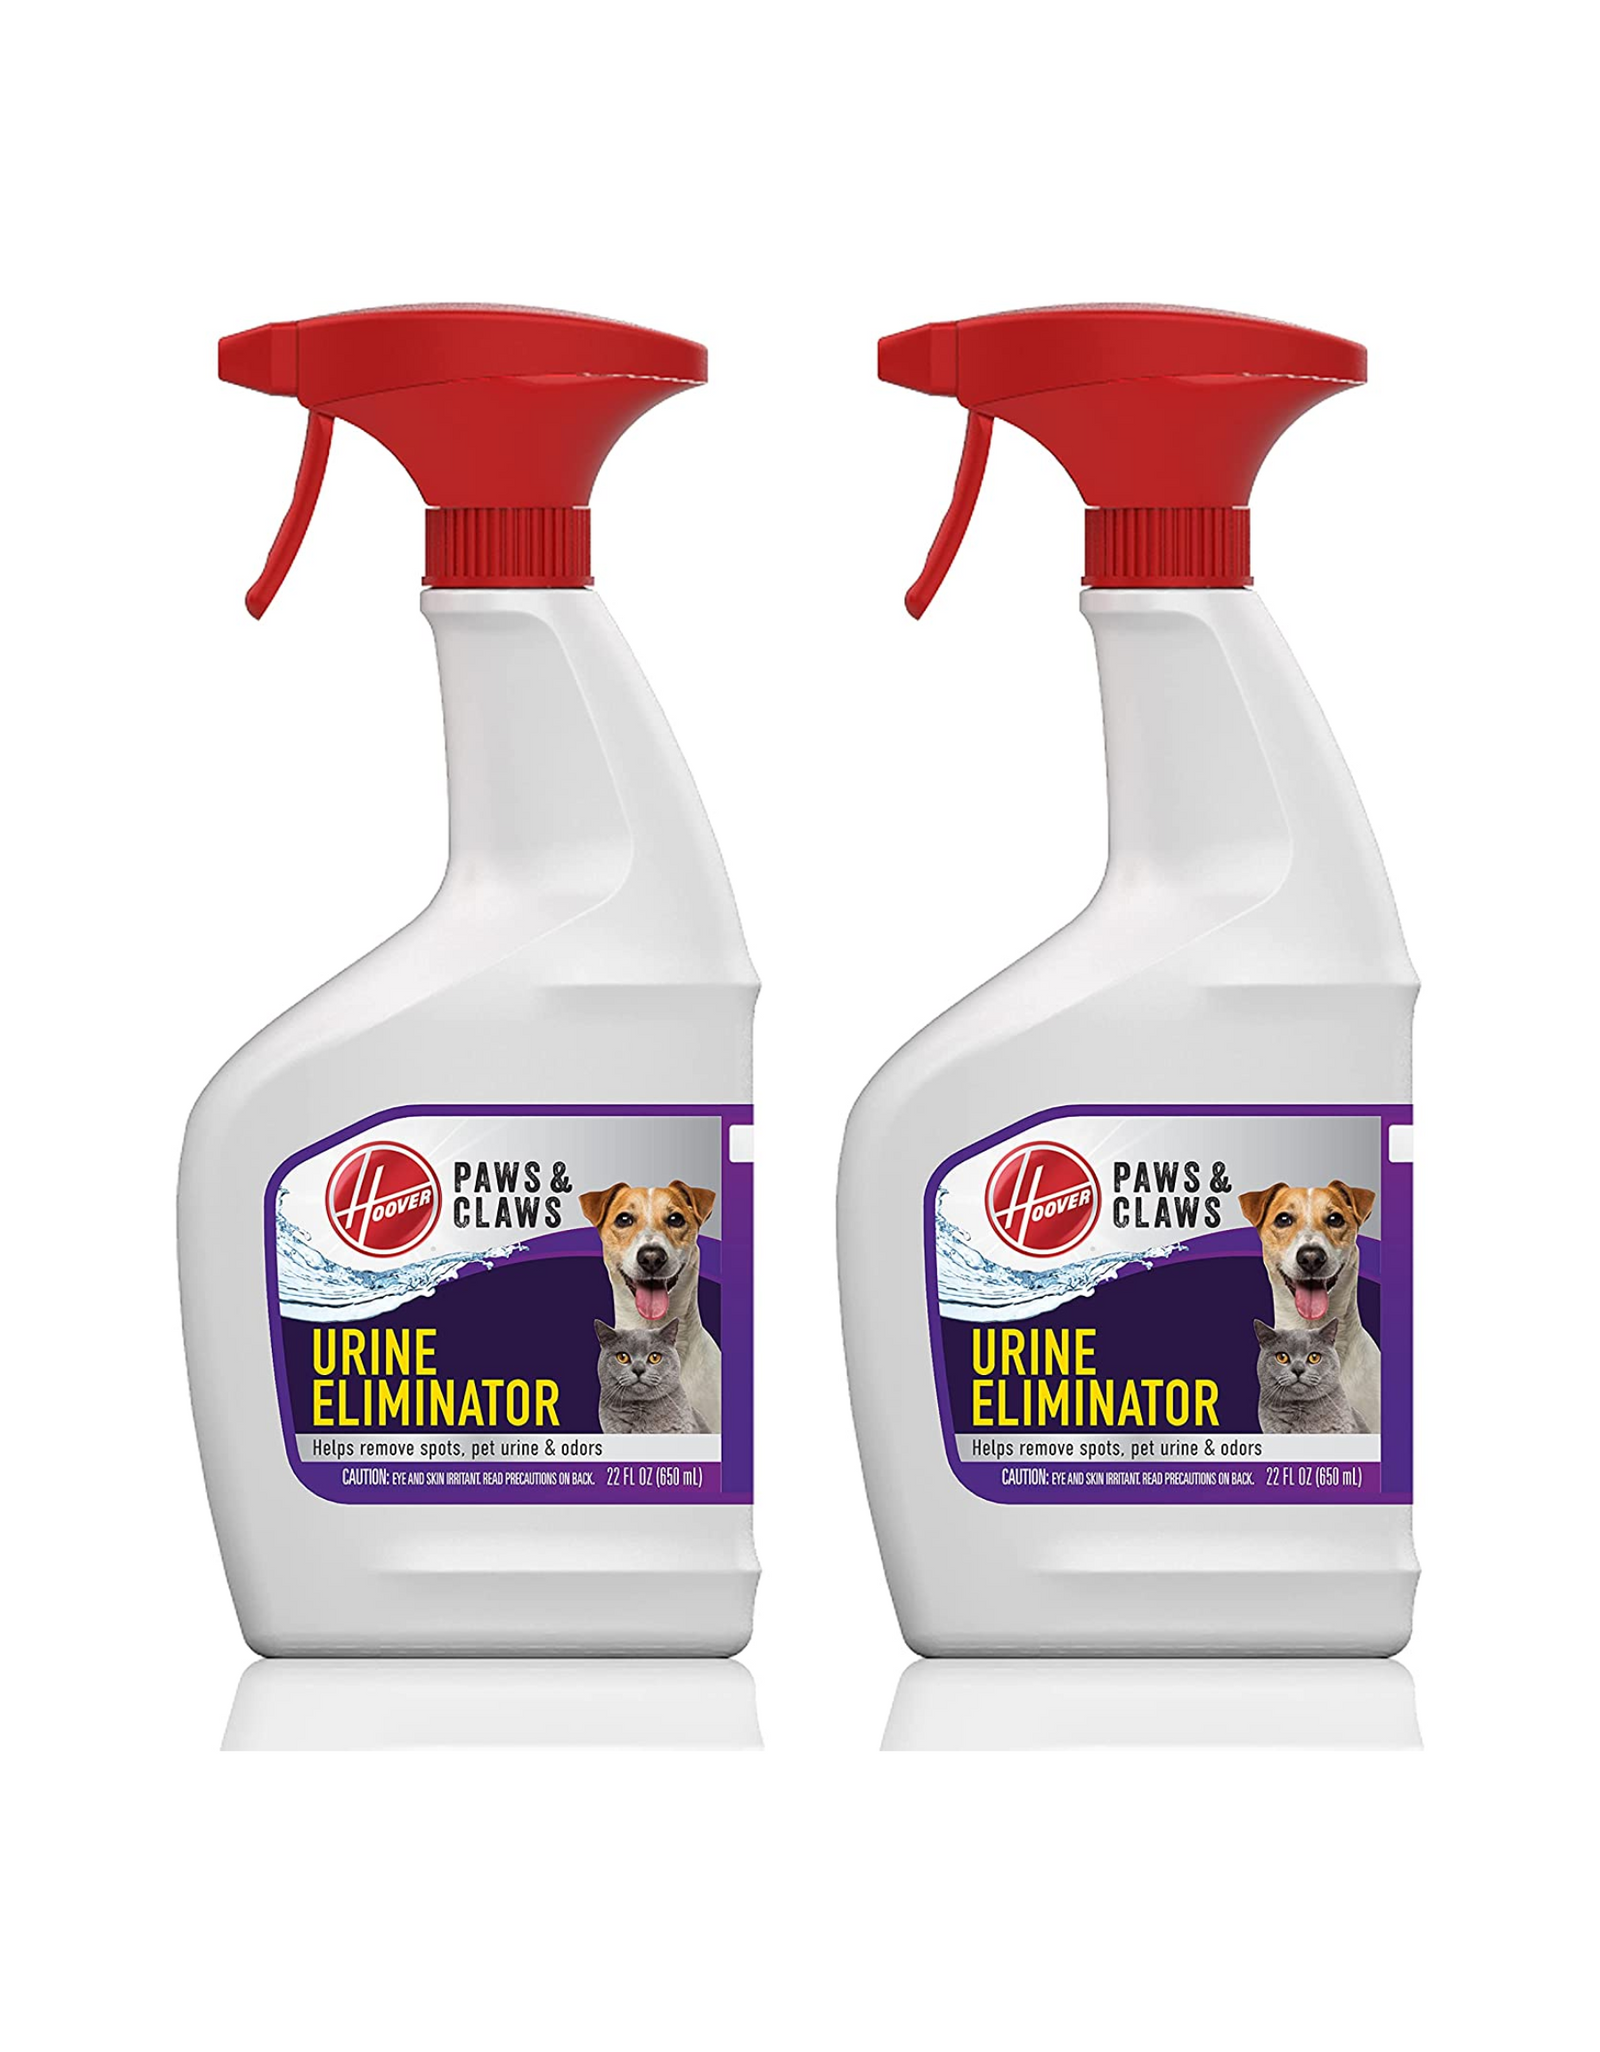 Hoover Paws & Claws Urine Eliminator Spray AH31601A, 22 fl oz, White (2 Pack)